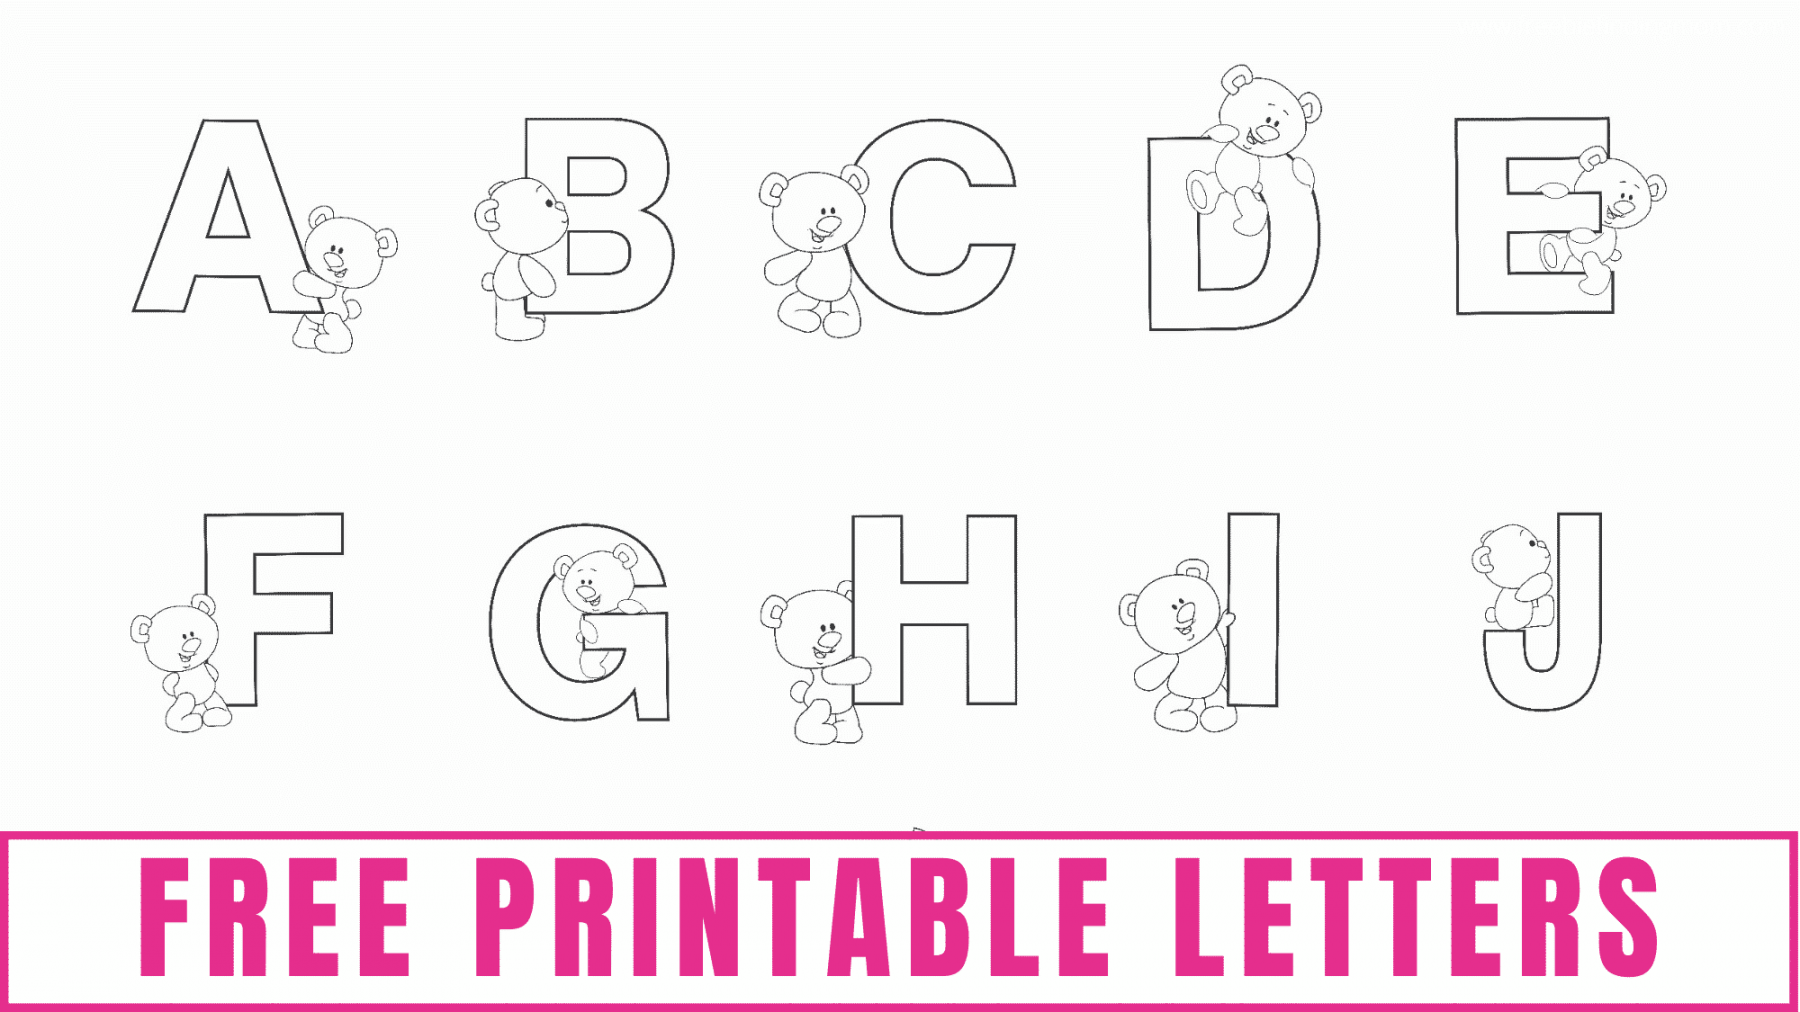 Free Printable Letters and Alphabet Letters - Freebie Finding Mom - FREE Printables - Free Printable Large Letters For Walls